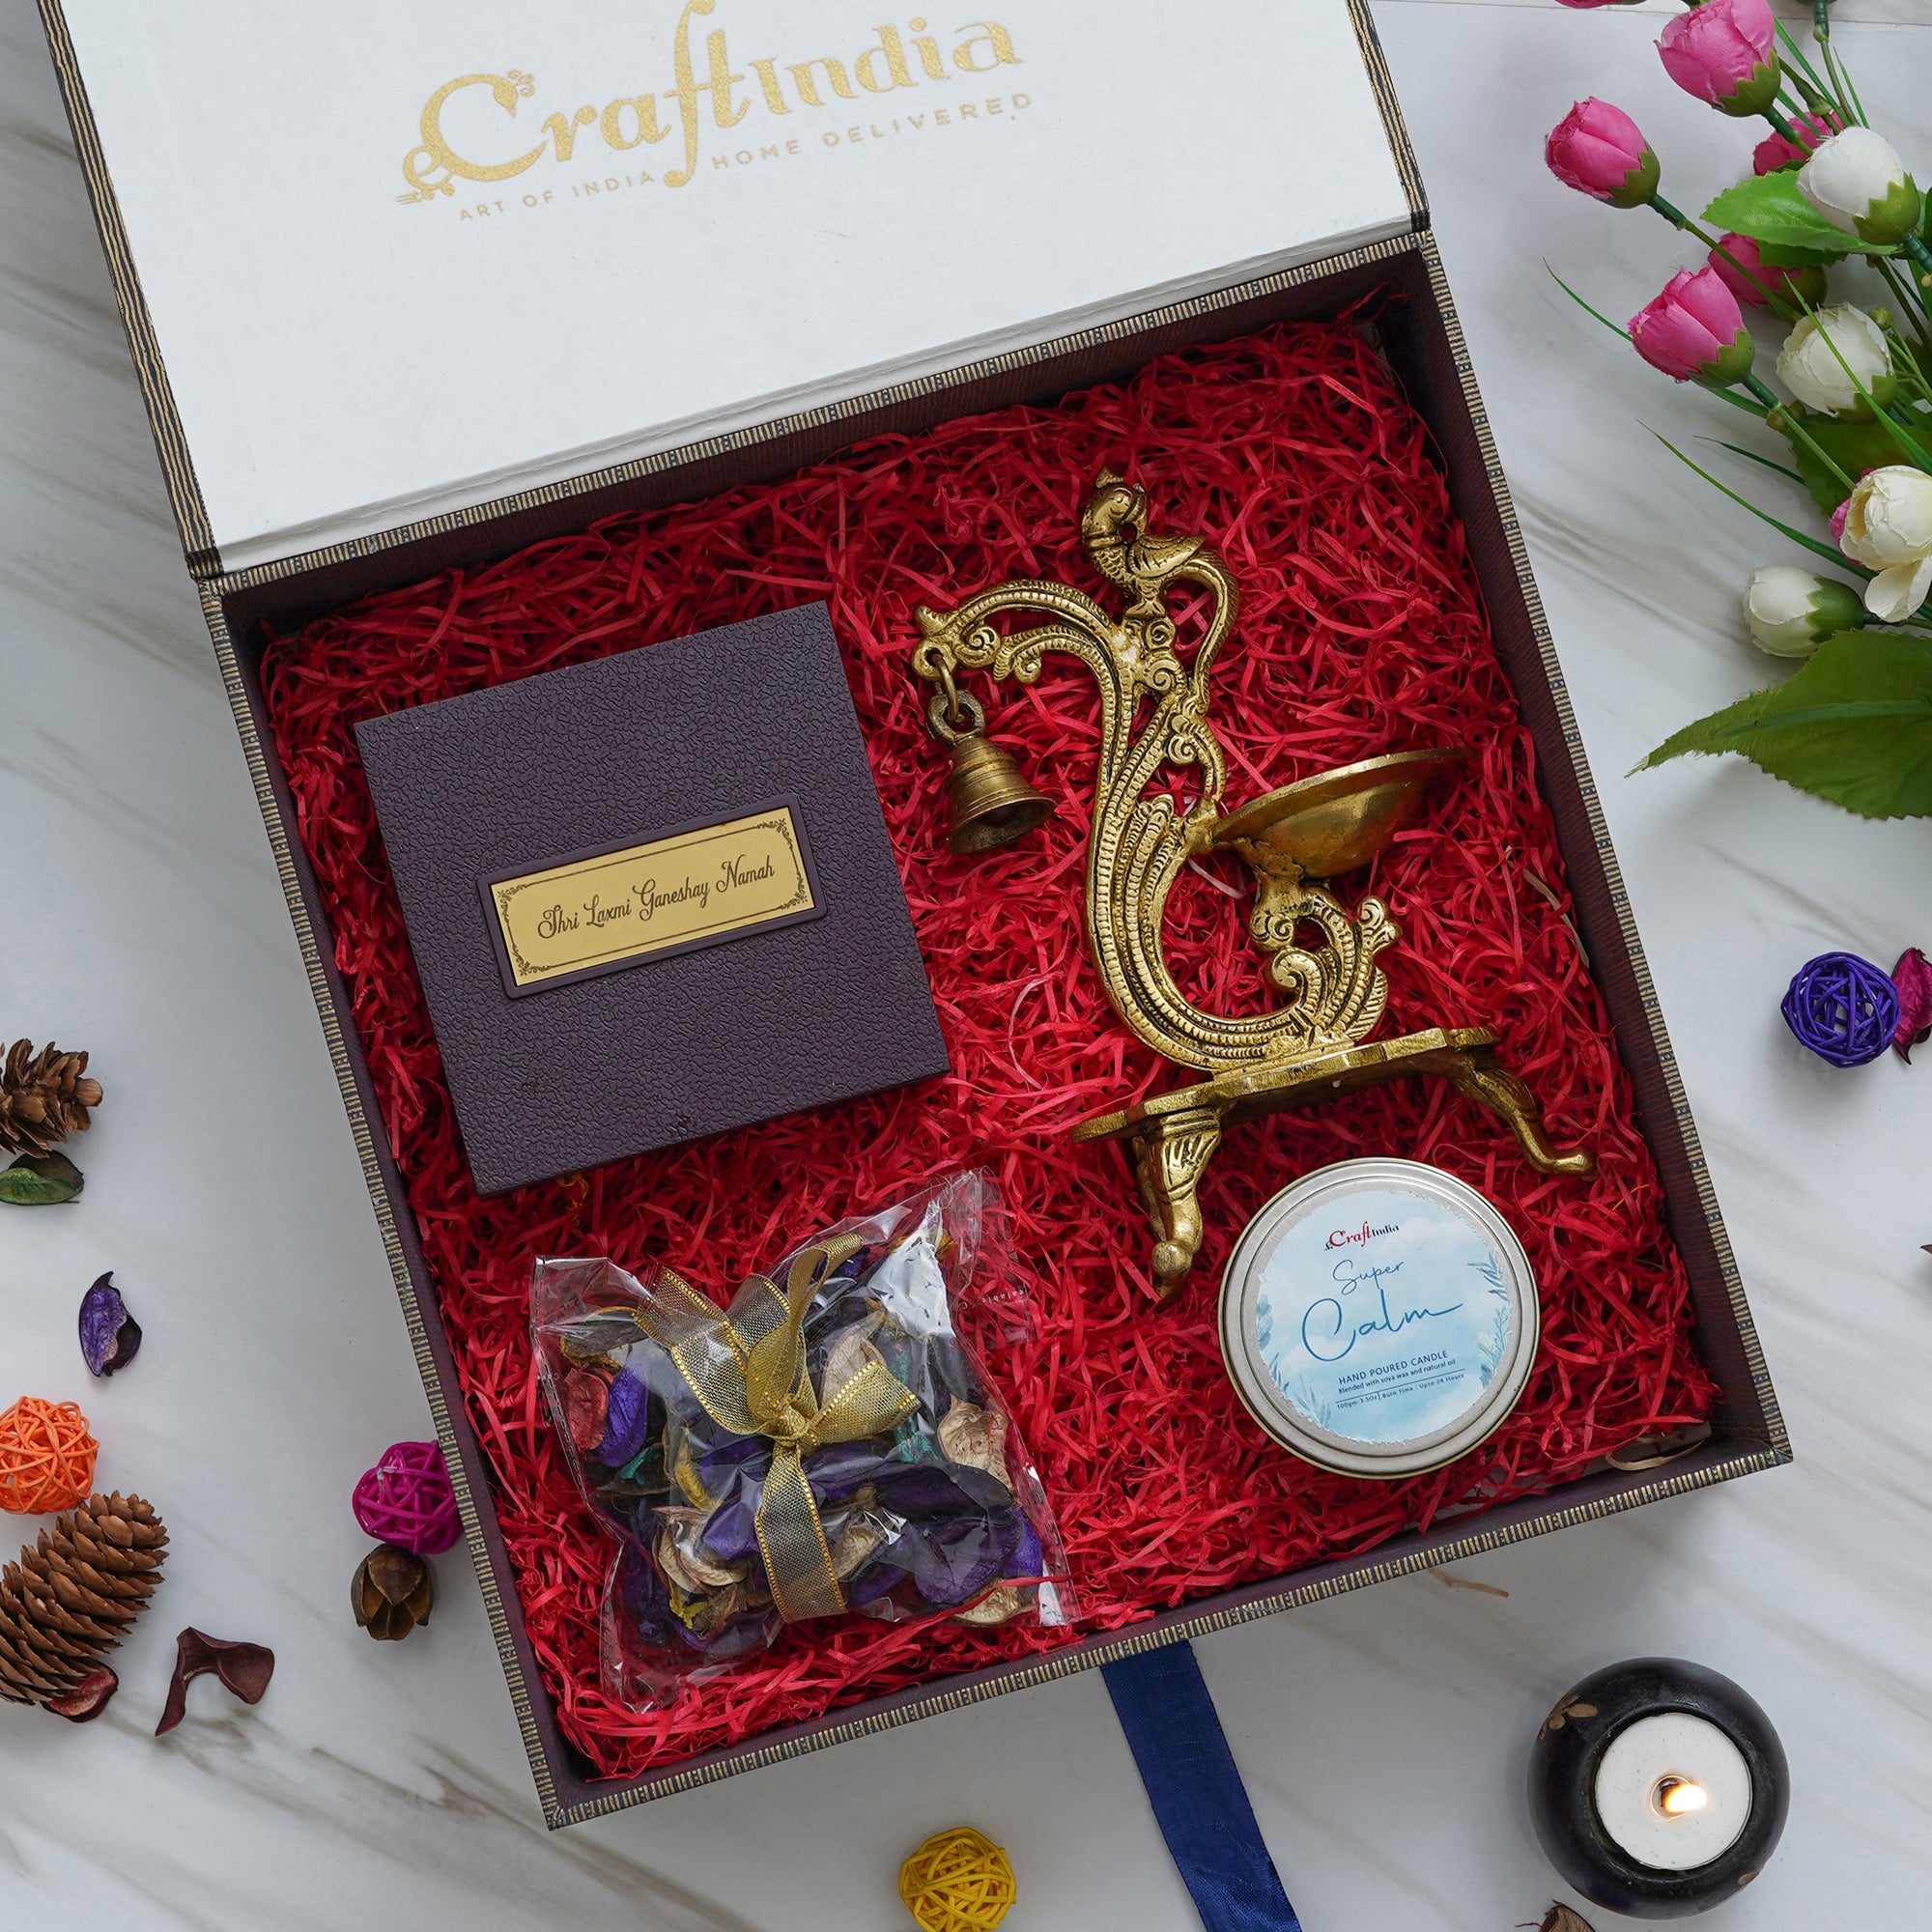 eCraftIndia Gift A Greet Hamper - Golden Handcrafted Parrot Designer Brass Diya with Bells and Stand, Gold Plated Lakshmi Ganesha Photo Frame and Charan Paduka Pooja Box, Super Calm Hand Poured Soya Wax Candle, Potpourri